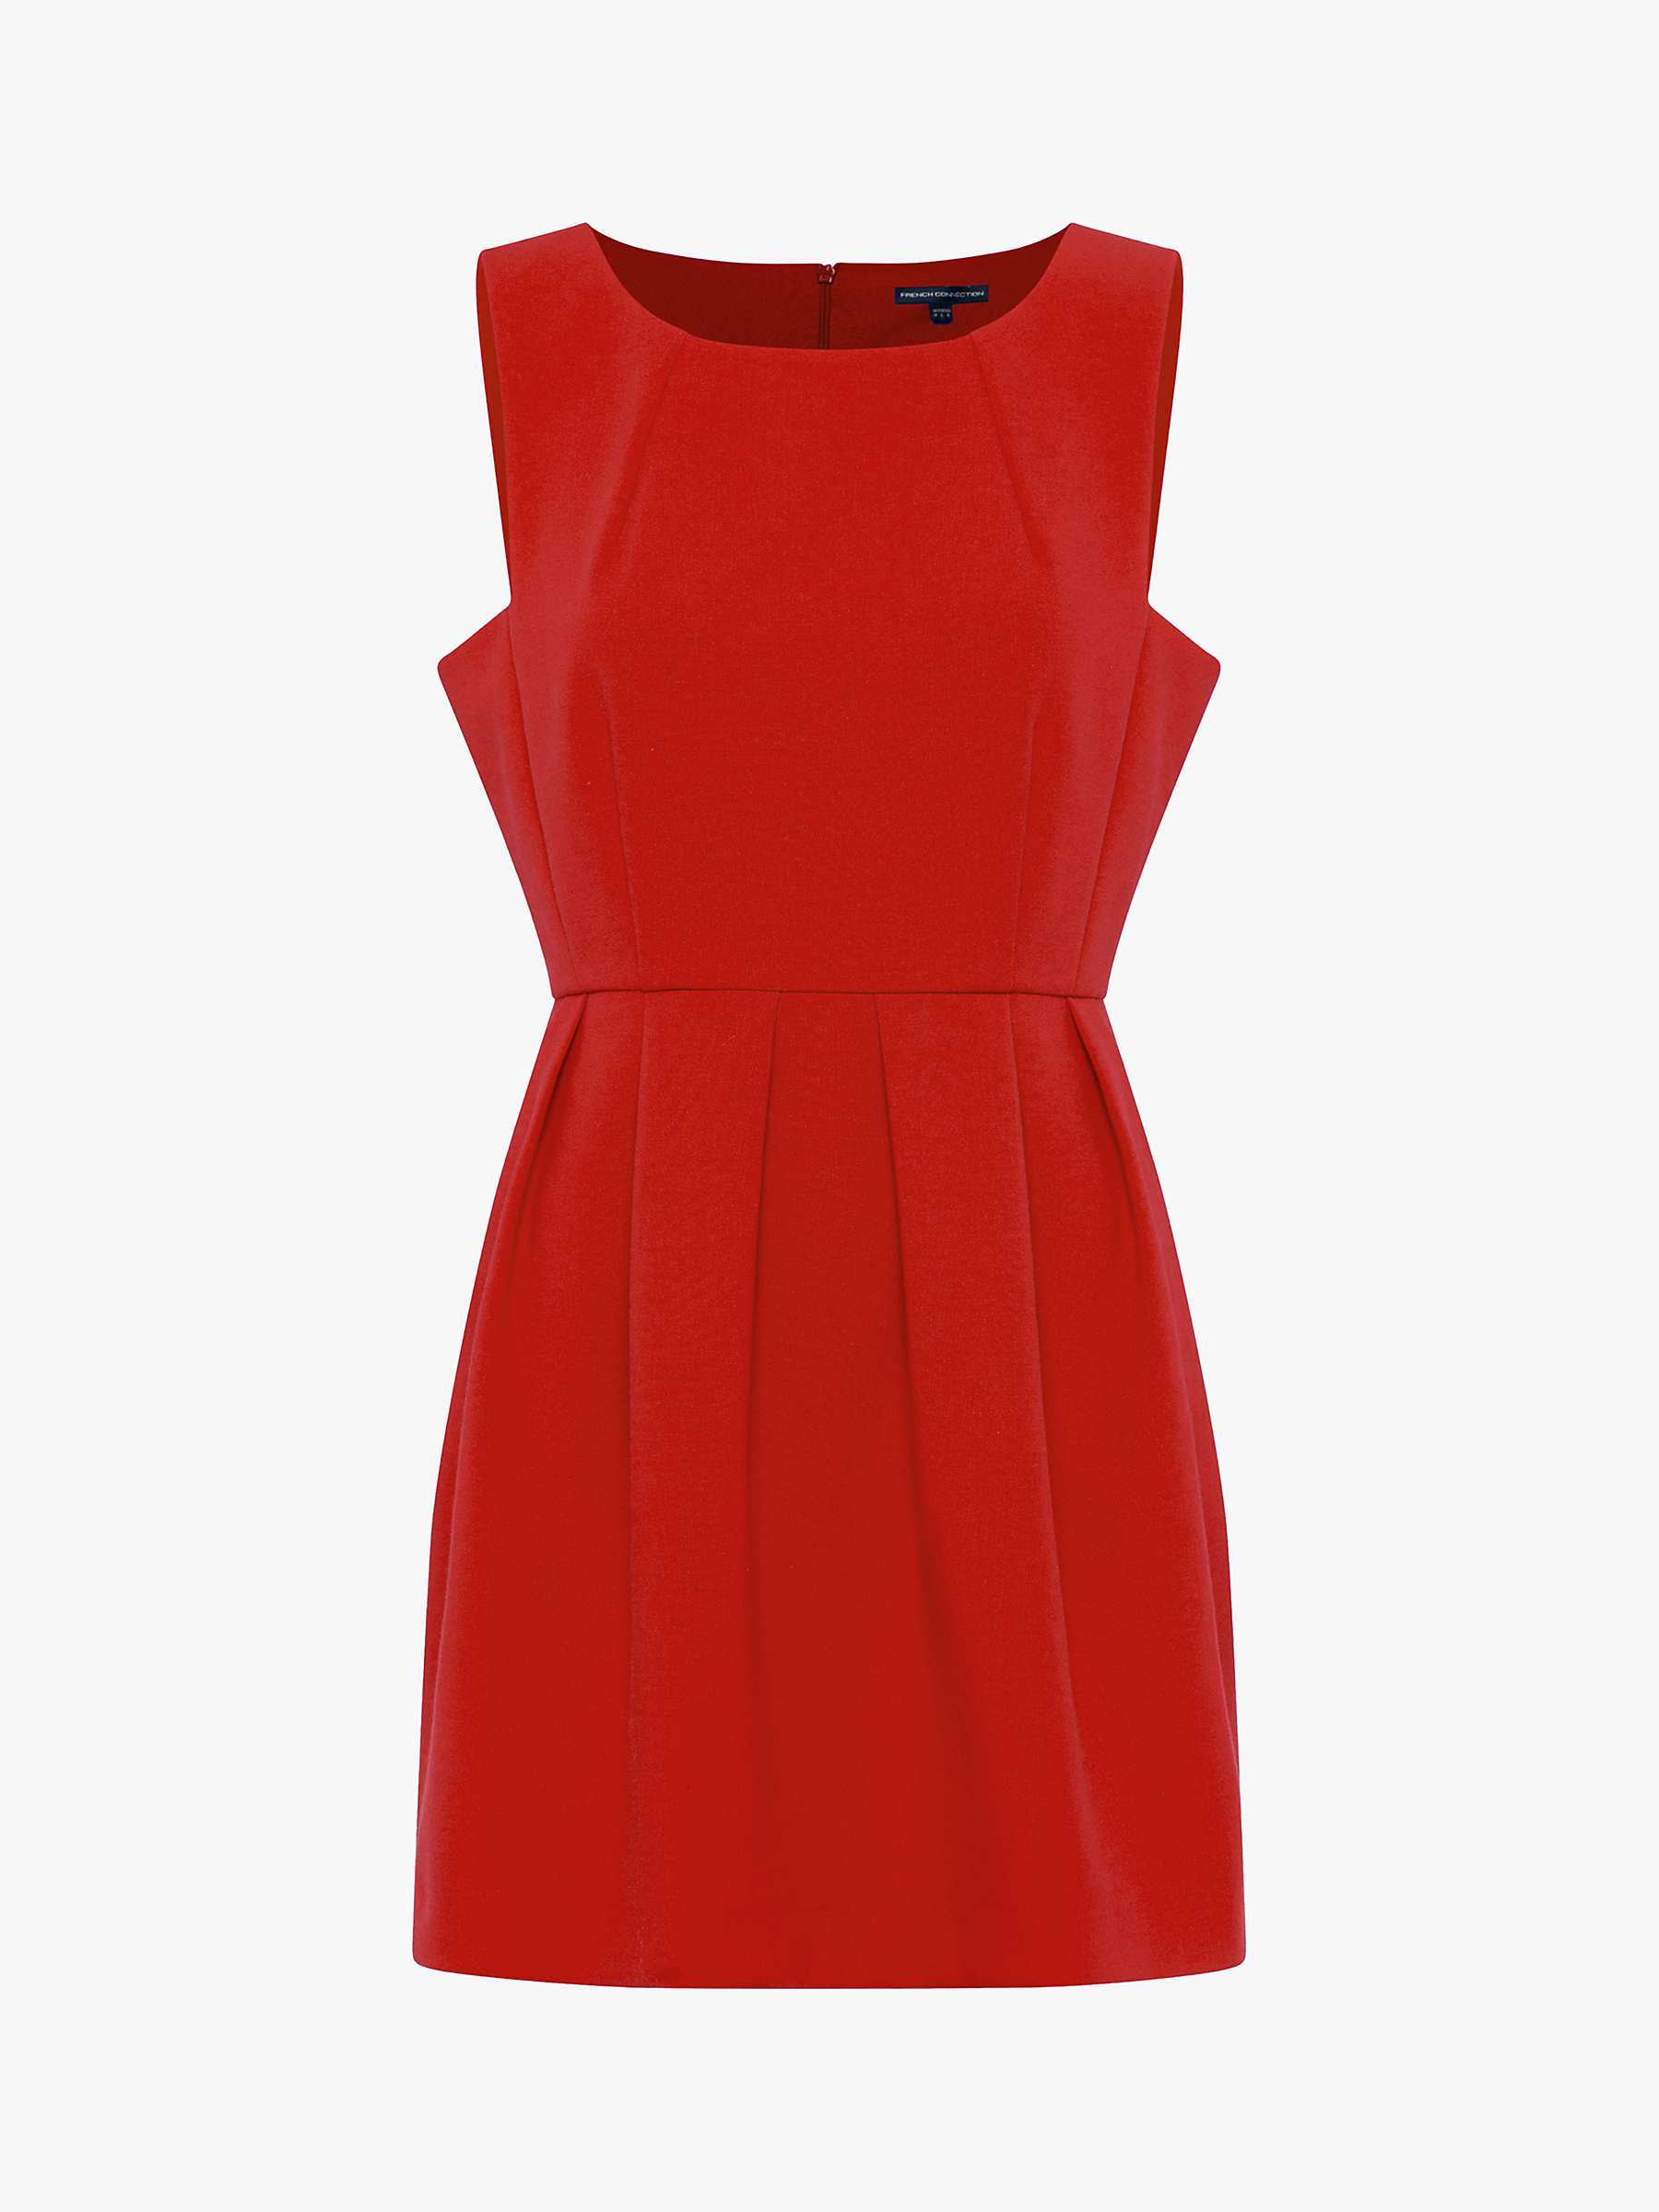 Buy French Connection Ito Mix Mini Dress, Fiery Red Online at johnlewis.com